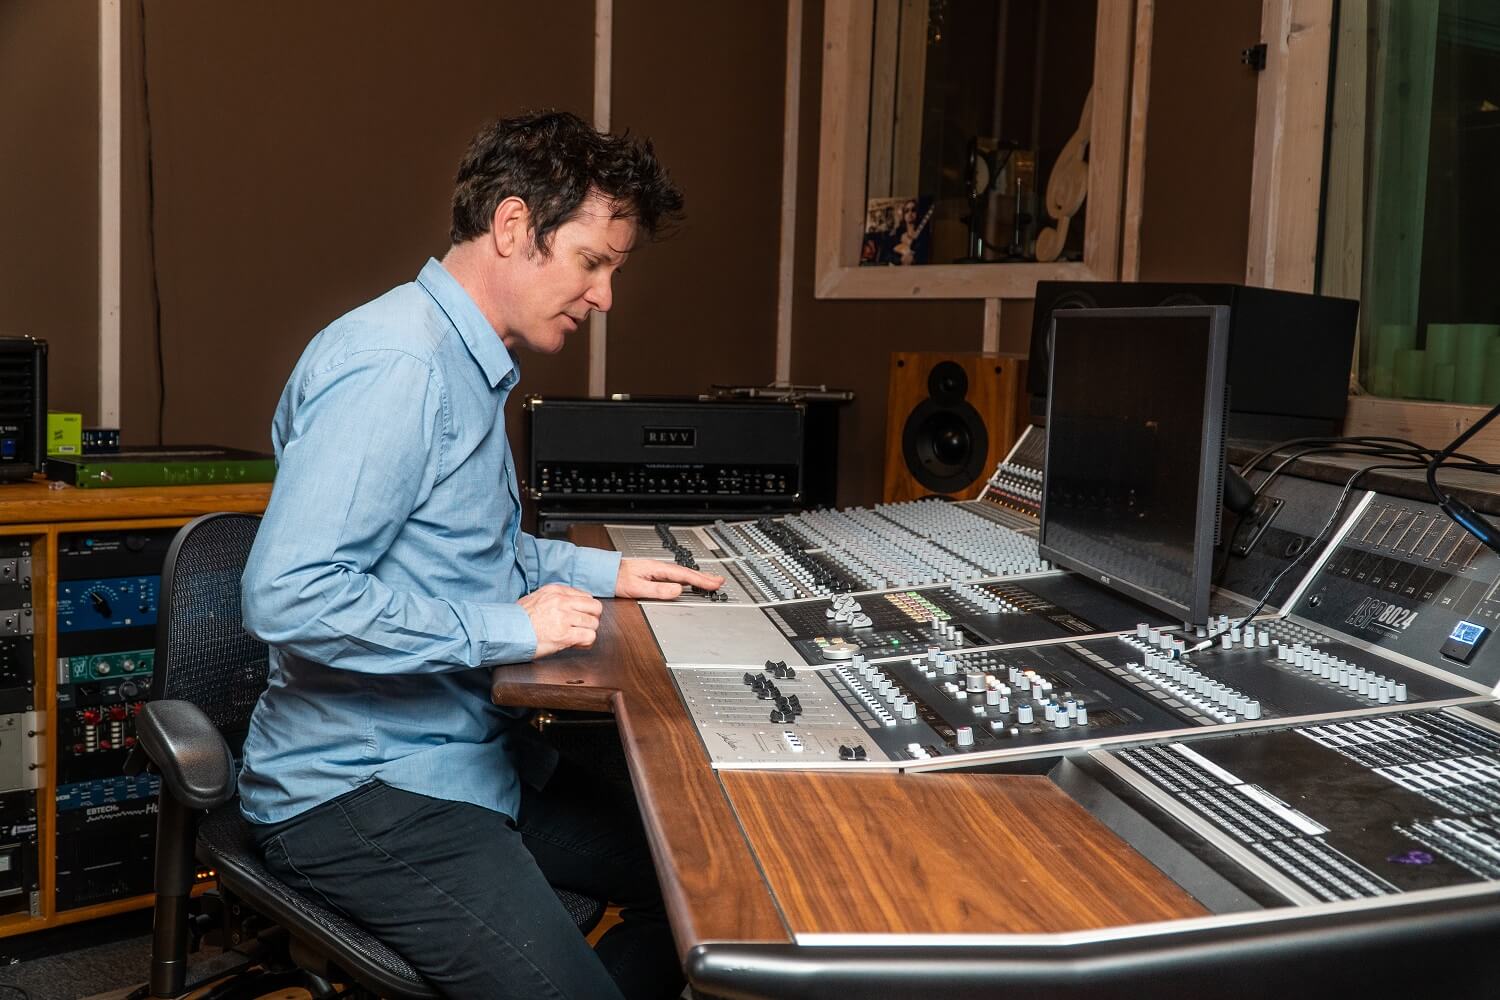 Man leans over mixing desk in recording studio